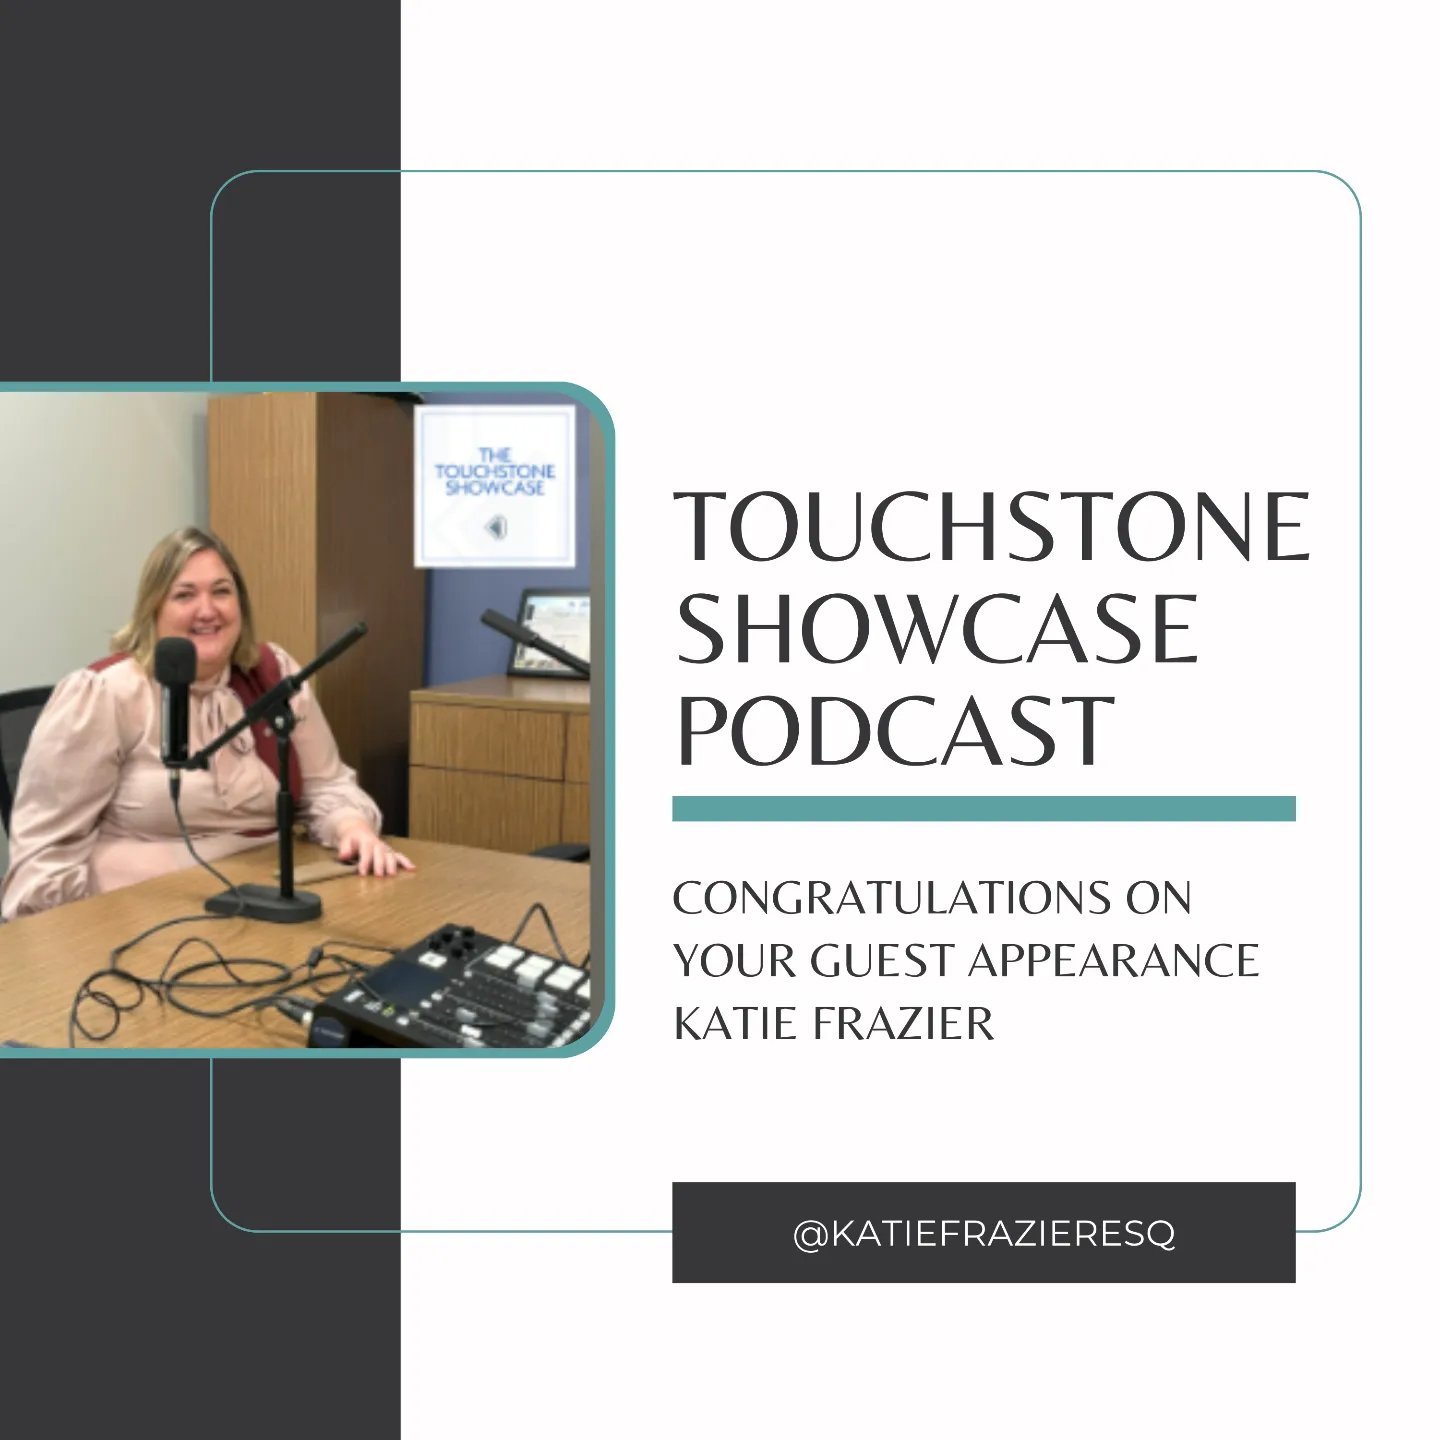 Congratulations to our favorite real estate attorney and friend. Give it a listen and fall in love with her and her work just as much as we have. 

Very impressed @katiefrazieresq 

https://open.spotify.com/episode/39BDqMmQWd0N6MkD2ewNzH?si=WJWpbhgeR